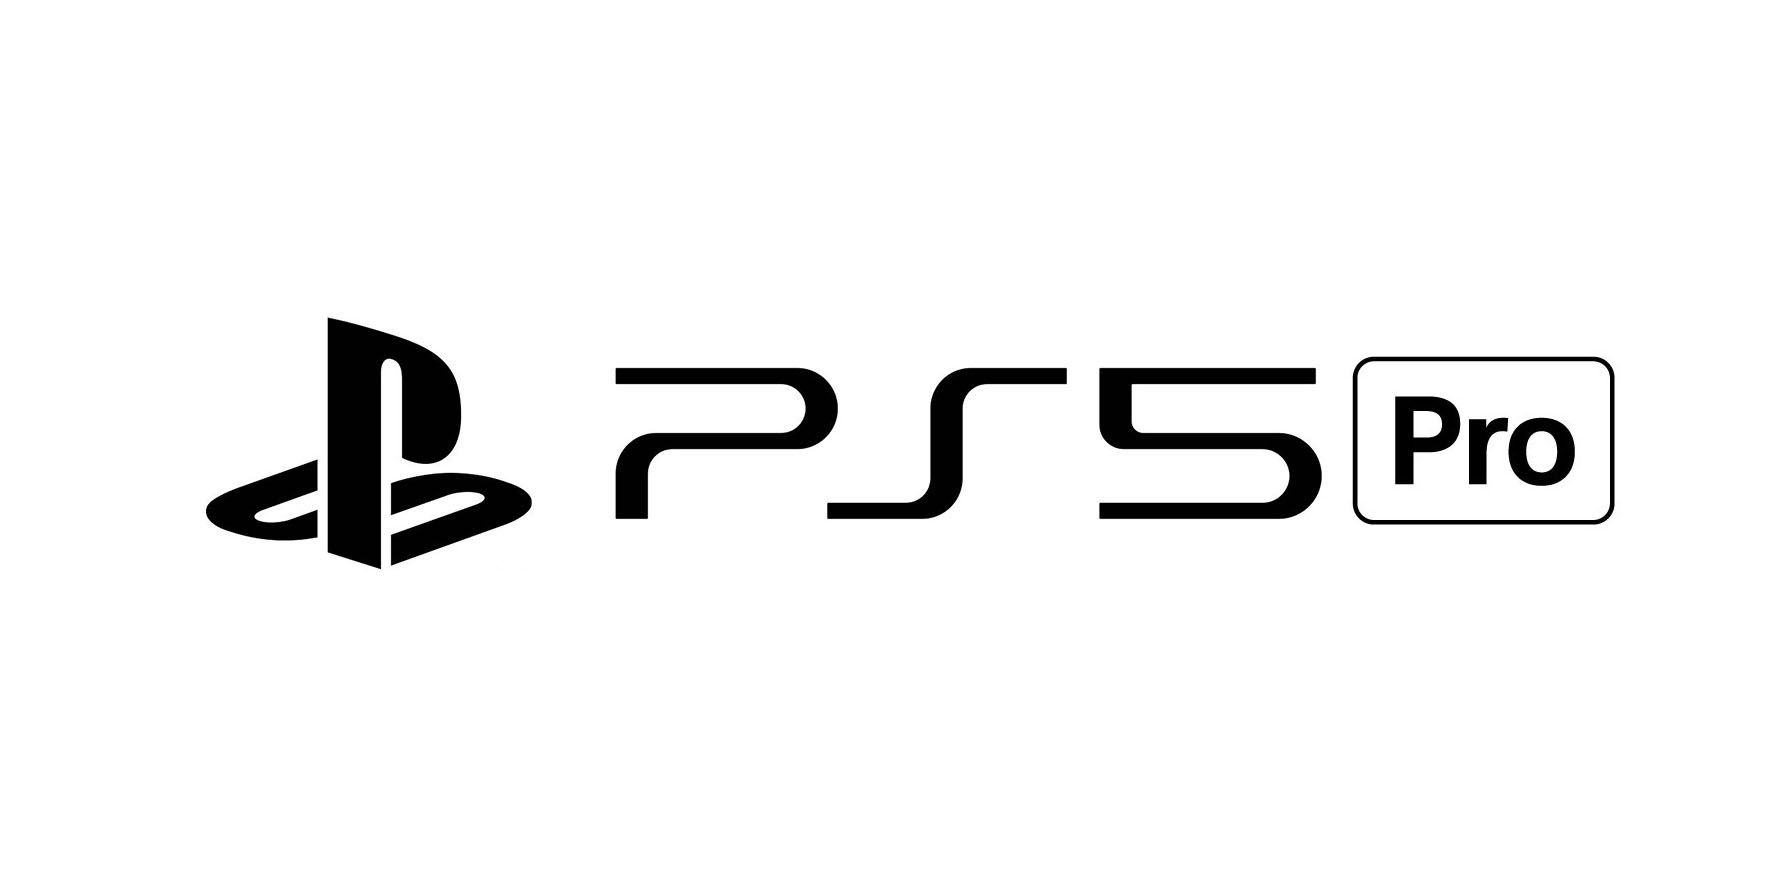 The PlayStation 5 Pro: What We Know So Far